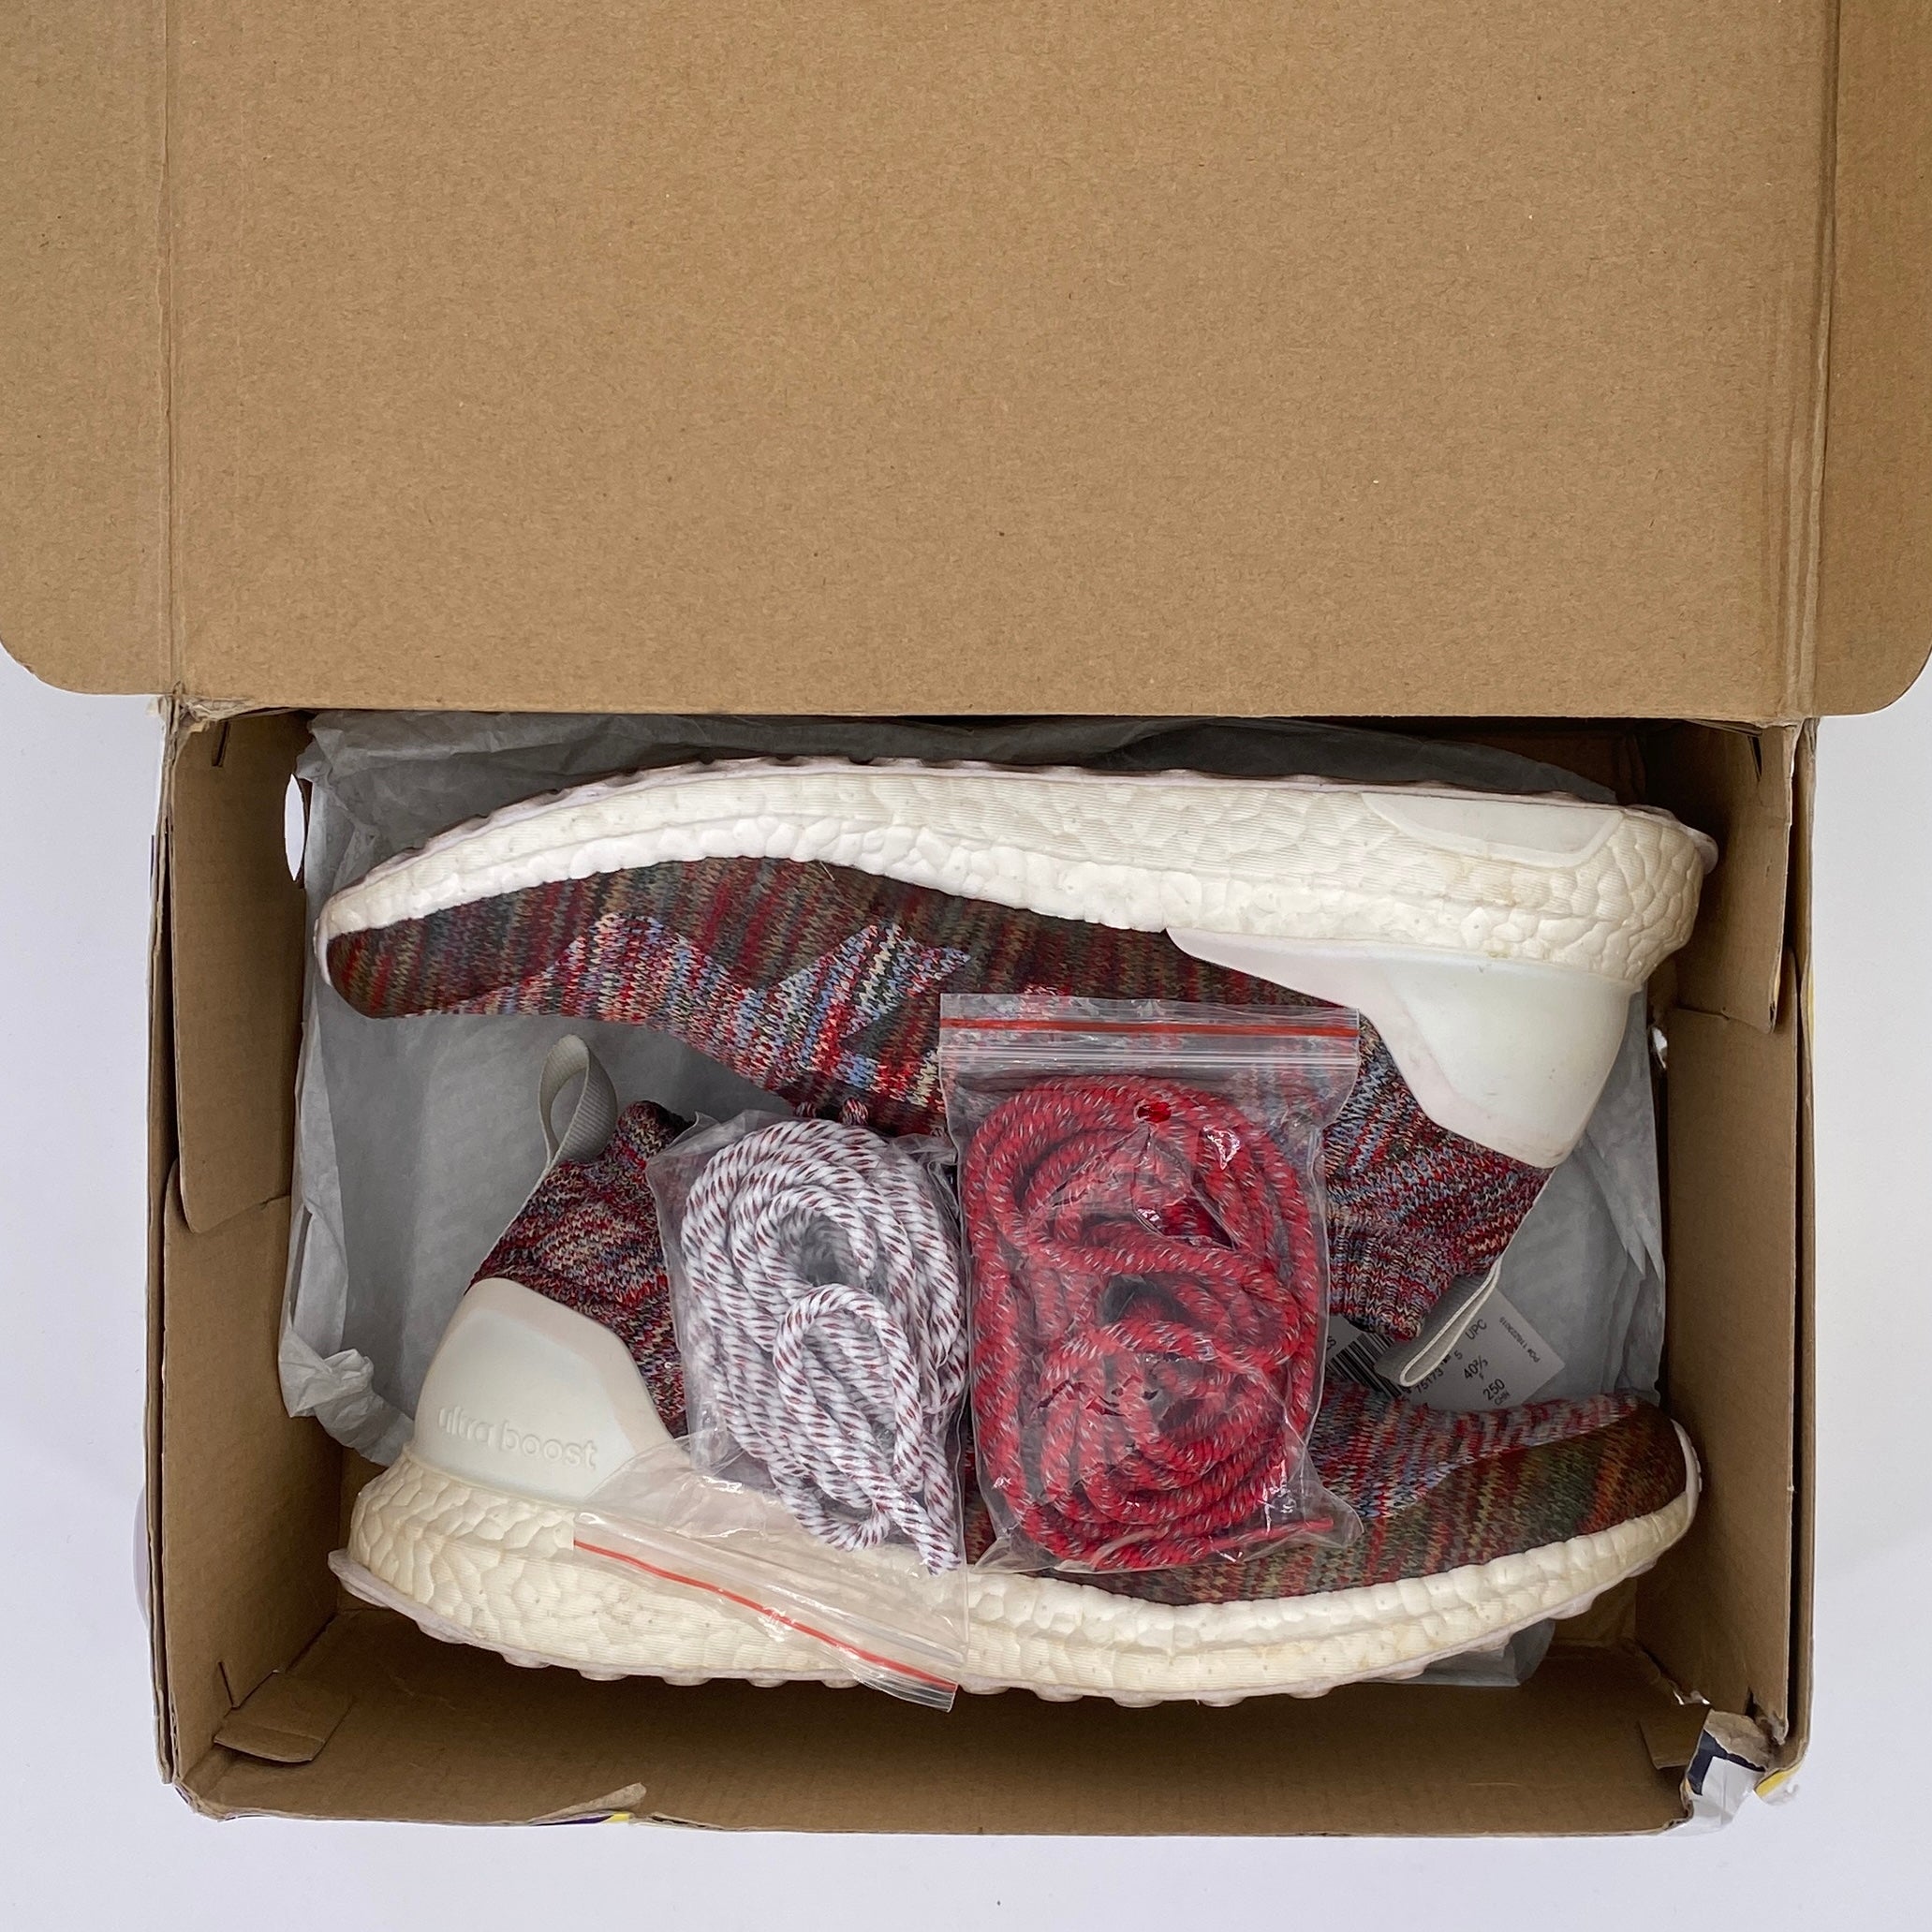 Adidas Ultra Boost Mid &quot;Kith&quot; 2016 Used Size 7.5